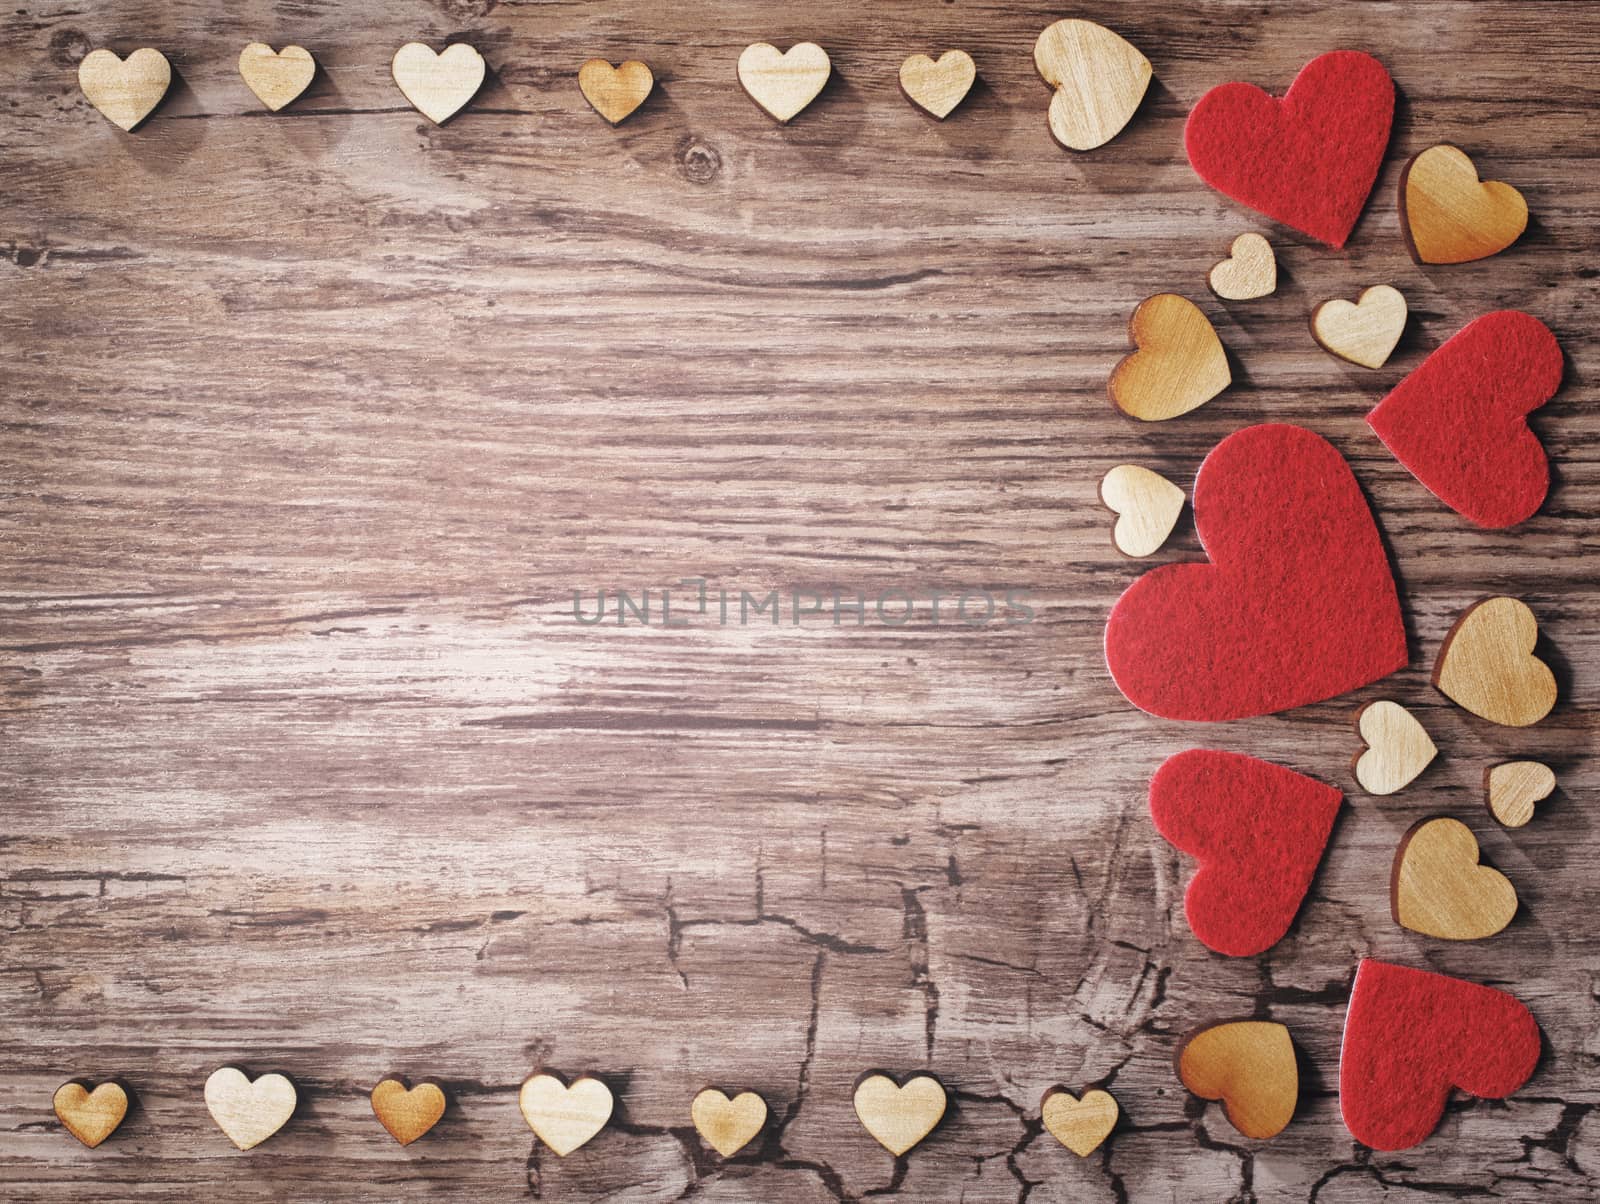 hearts on old wooden background